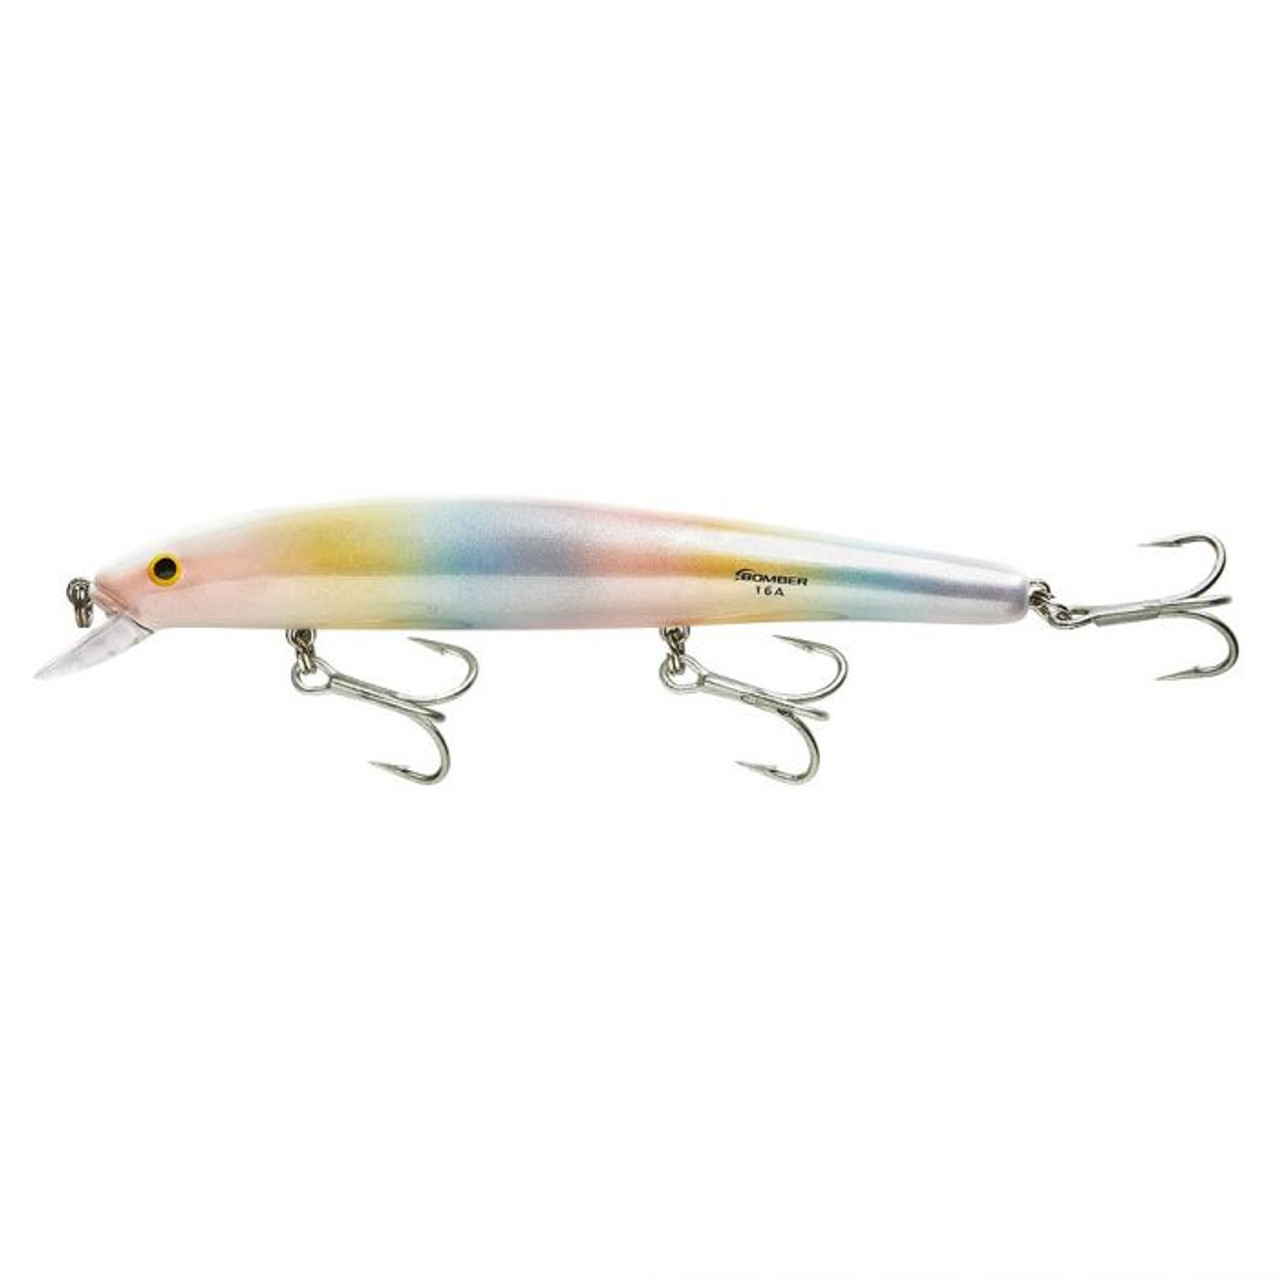 Bomber Lures B14AXCHO Long A Fishing Lure, Chartreuse Flash/Orange Belly, 3  1/2, 0.375 oz, Topwater Lures -  Canada